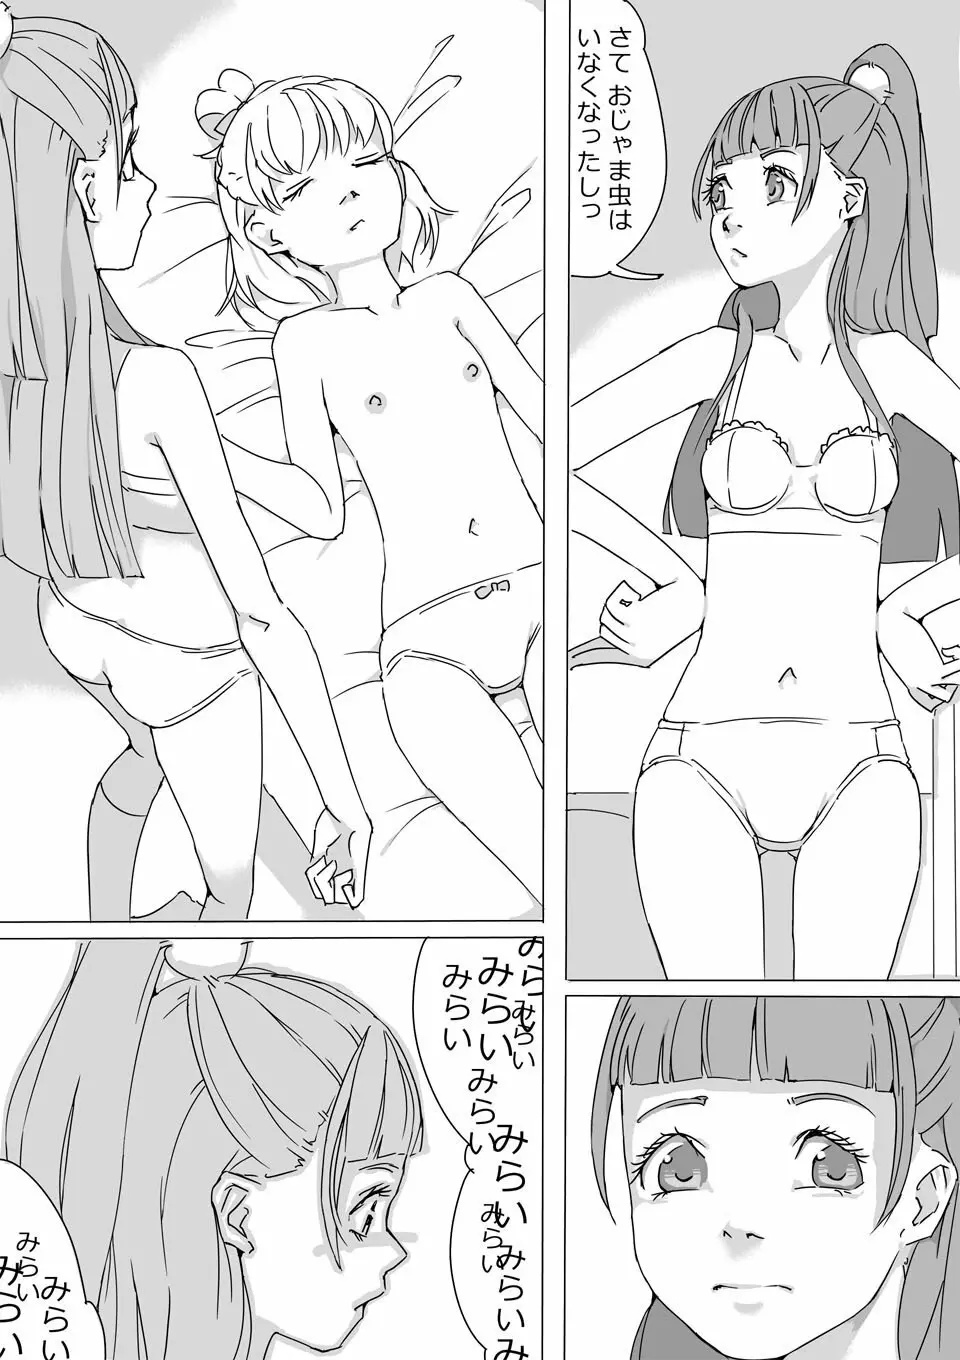 Untitled Precure Doujinshi - page15